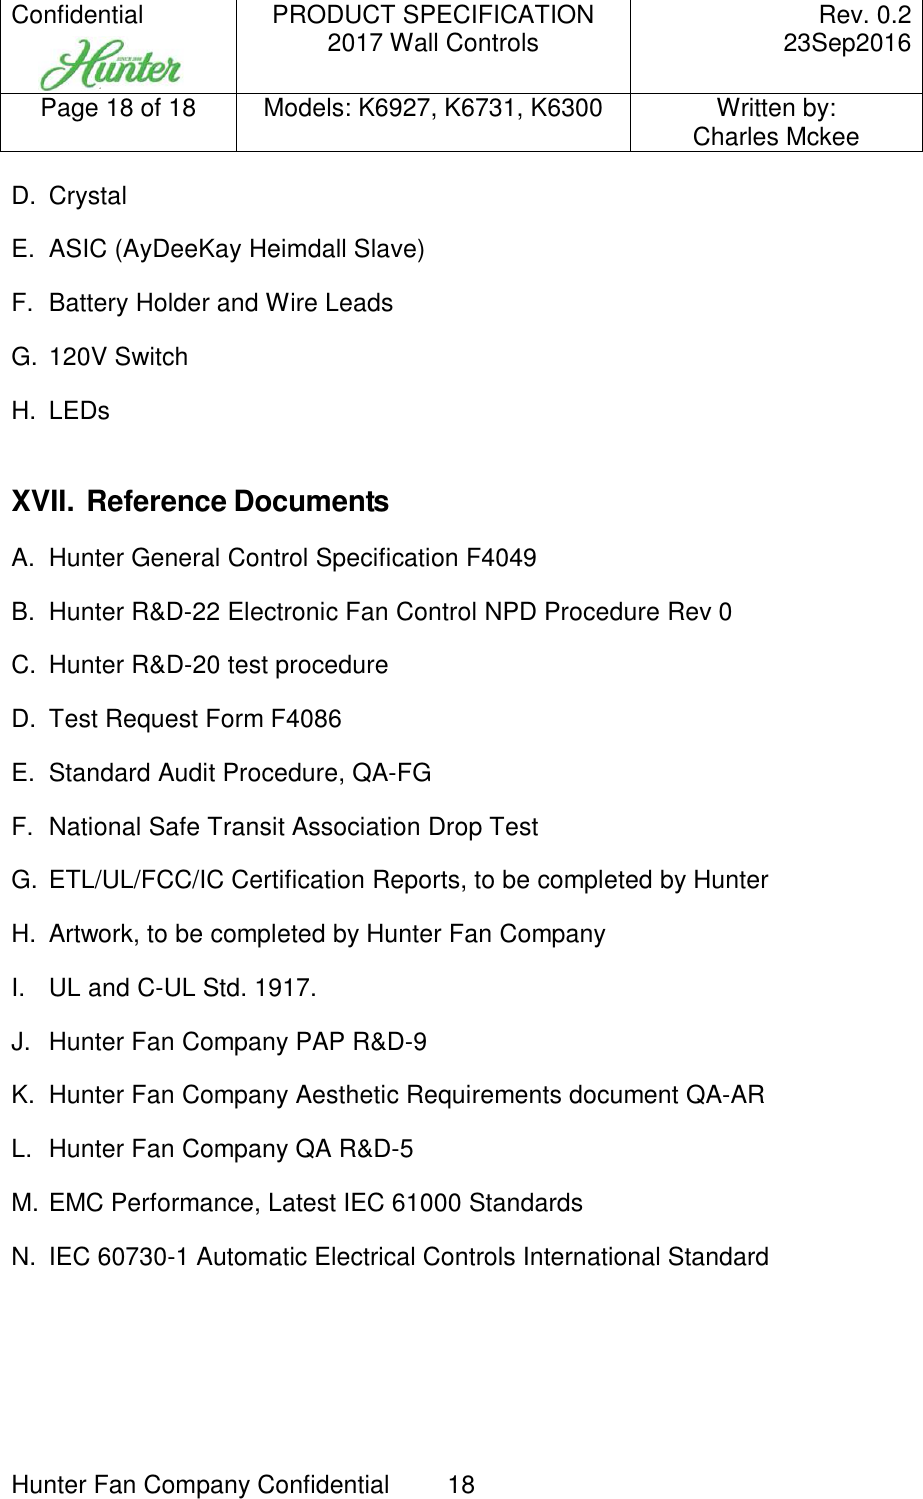 Confidential     PRODUCT SPECIFICATION 2017 Wall Controls  Rev. 0.2     23Sep2016 Page 18 of 18  Models: K6927, K6731, K6300  Written by: Charles Mckee  Hunter Fan Company Confidential  18   D.  Crystal E.  ASIC (AyDeeKay Heimdall Slave) F.  Battery Holder and Wire Leads G.  120V Switch H.  LEDs  XVII. Reference Documents A.  Hunter General Control Specification F4049 B.  Hunter R&amp;D-22 Electronic Fan Control NPD Procedure Rev 0 C.  Hunter R&amp;D-20 test procedure D.  Test Request Form F4086 E.  Standard Audit Procedure, QA-FG F.  National Safe Transit Association Drop Test G.  ETL/UL/FCC/IC Certification Reports, to be completed by Hunter H.  Artwork, to be completed by Hunter Fan Company I.  UL and C-UL Std. 1917. J.  Hunter Fan Company PAP R&amp;D-9 K.  Hunter Fan Company Aesthetic Requirements document QA-AR  L.  Hunter Fan Company QA R&amp;D-5 M. EMC Performance, Latest IEC 61000 Standards N.  IEC 60730-1 Automatic Electrical Controls International Standard  